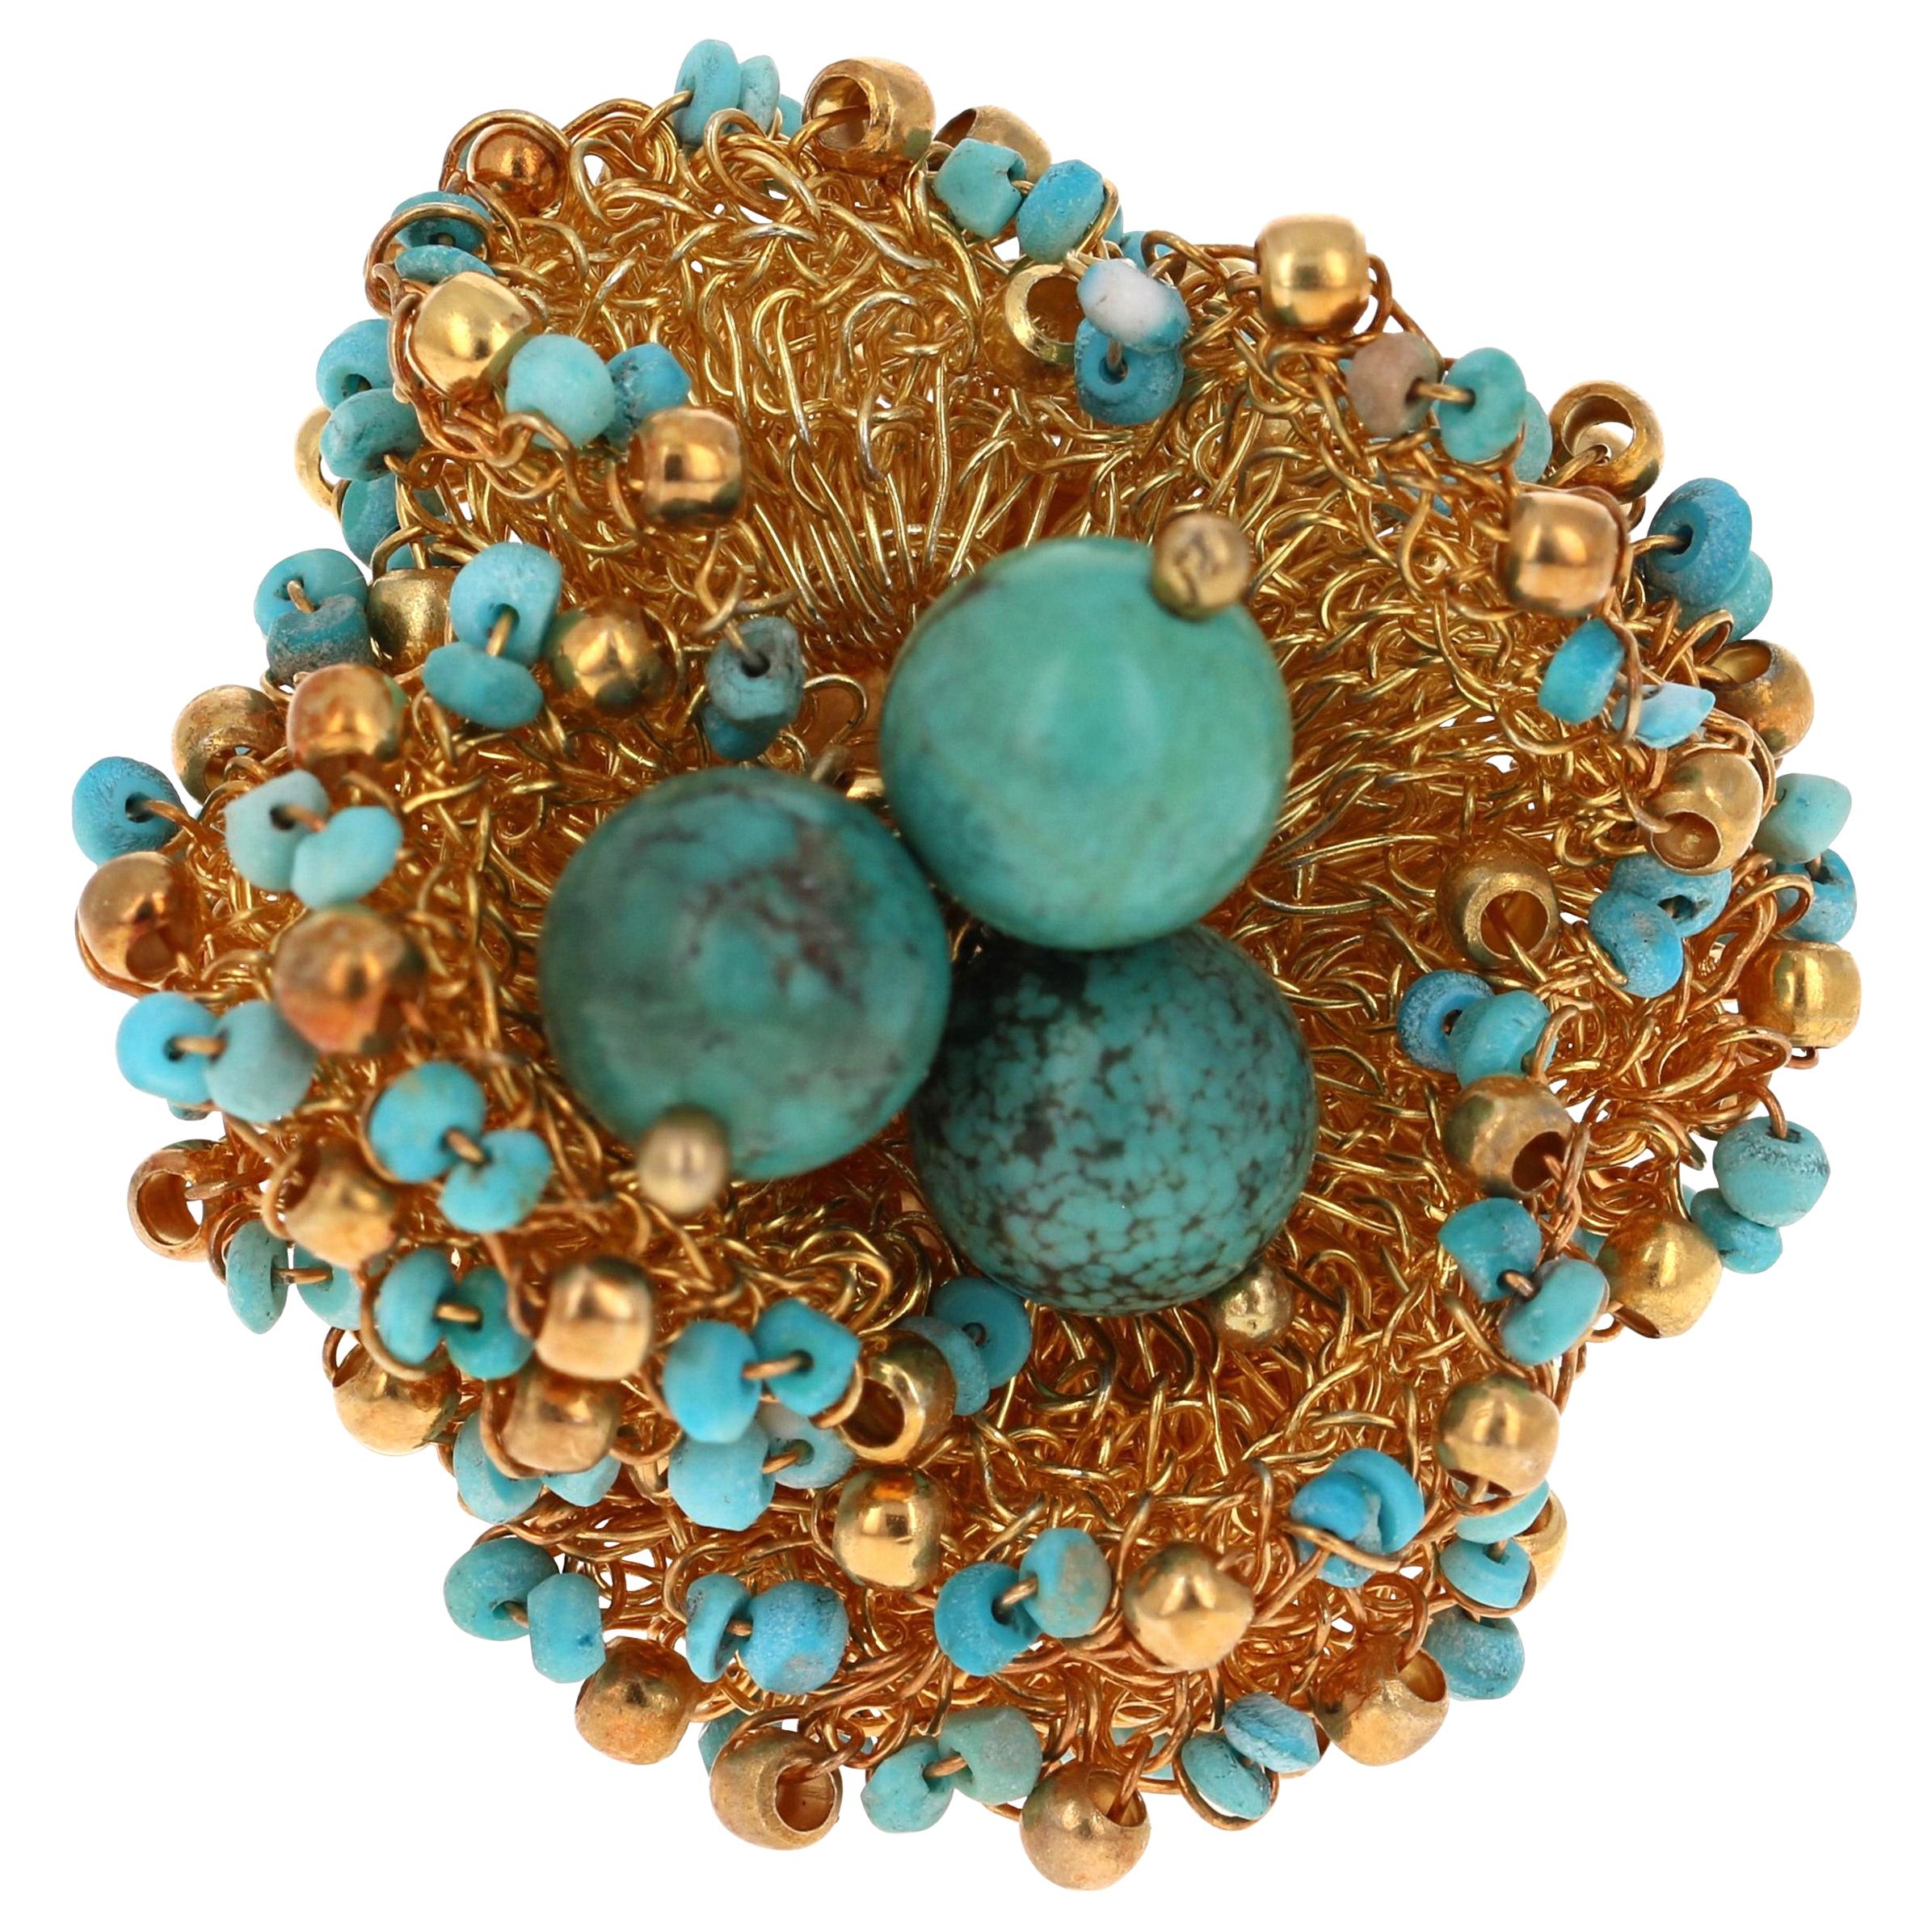 Sterling Silver 22 Karat Gold-Plated Genuine Turquoise Ring